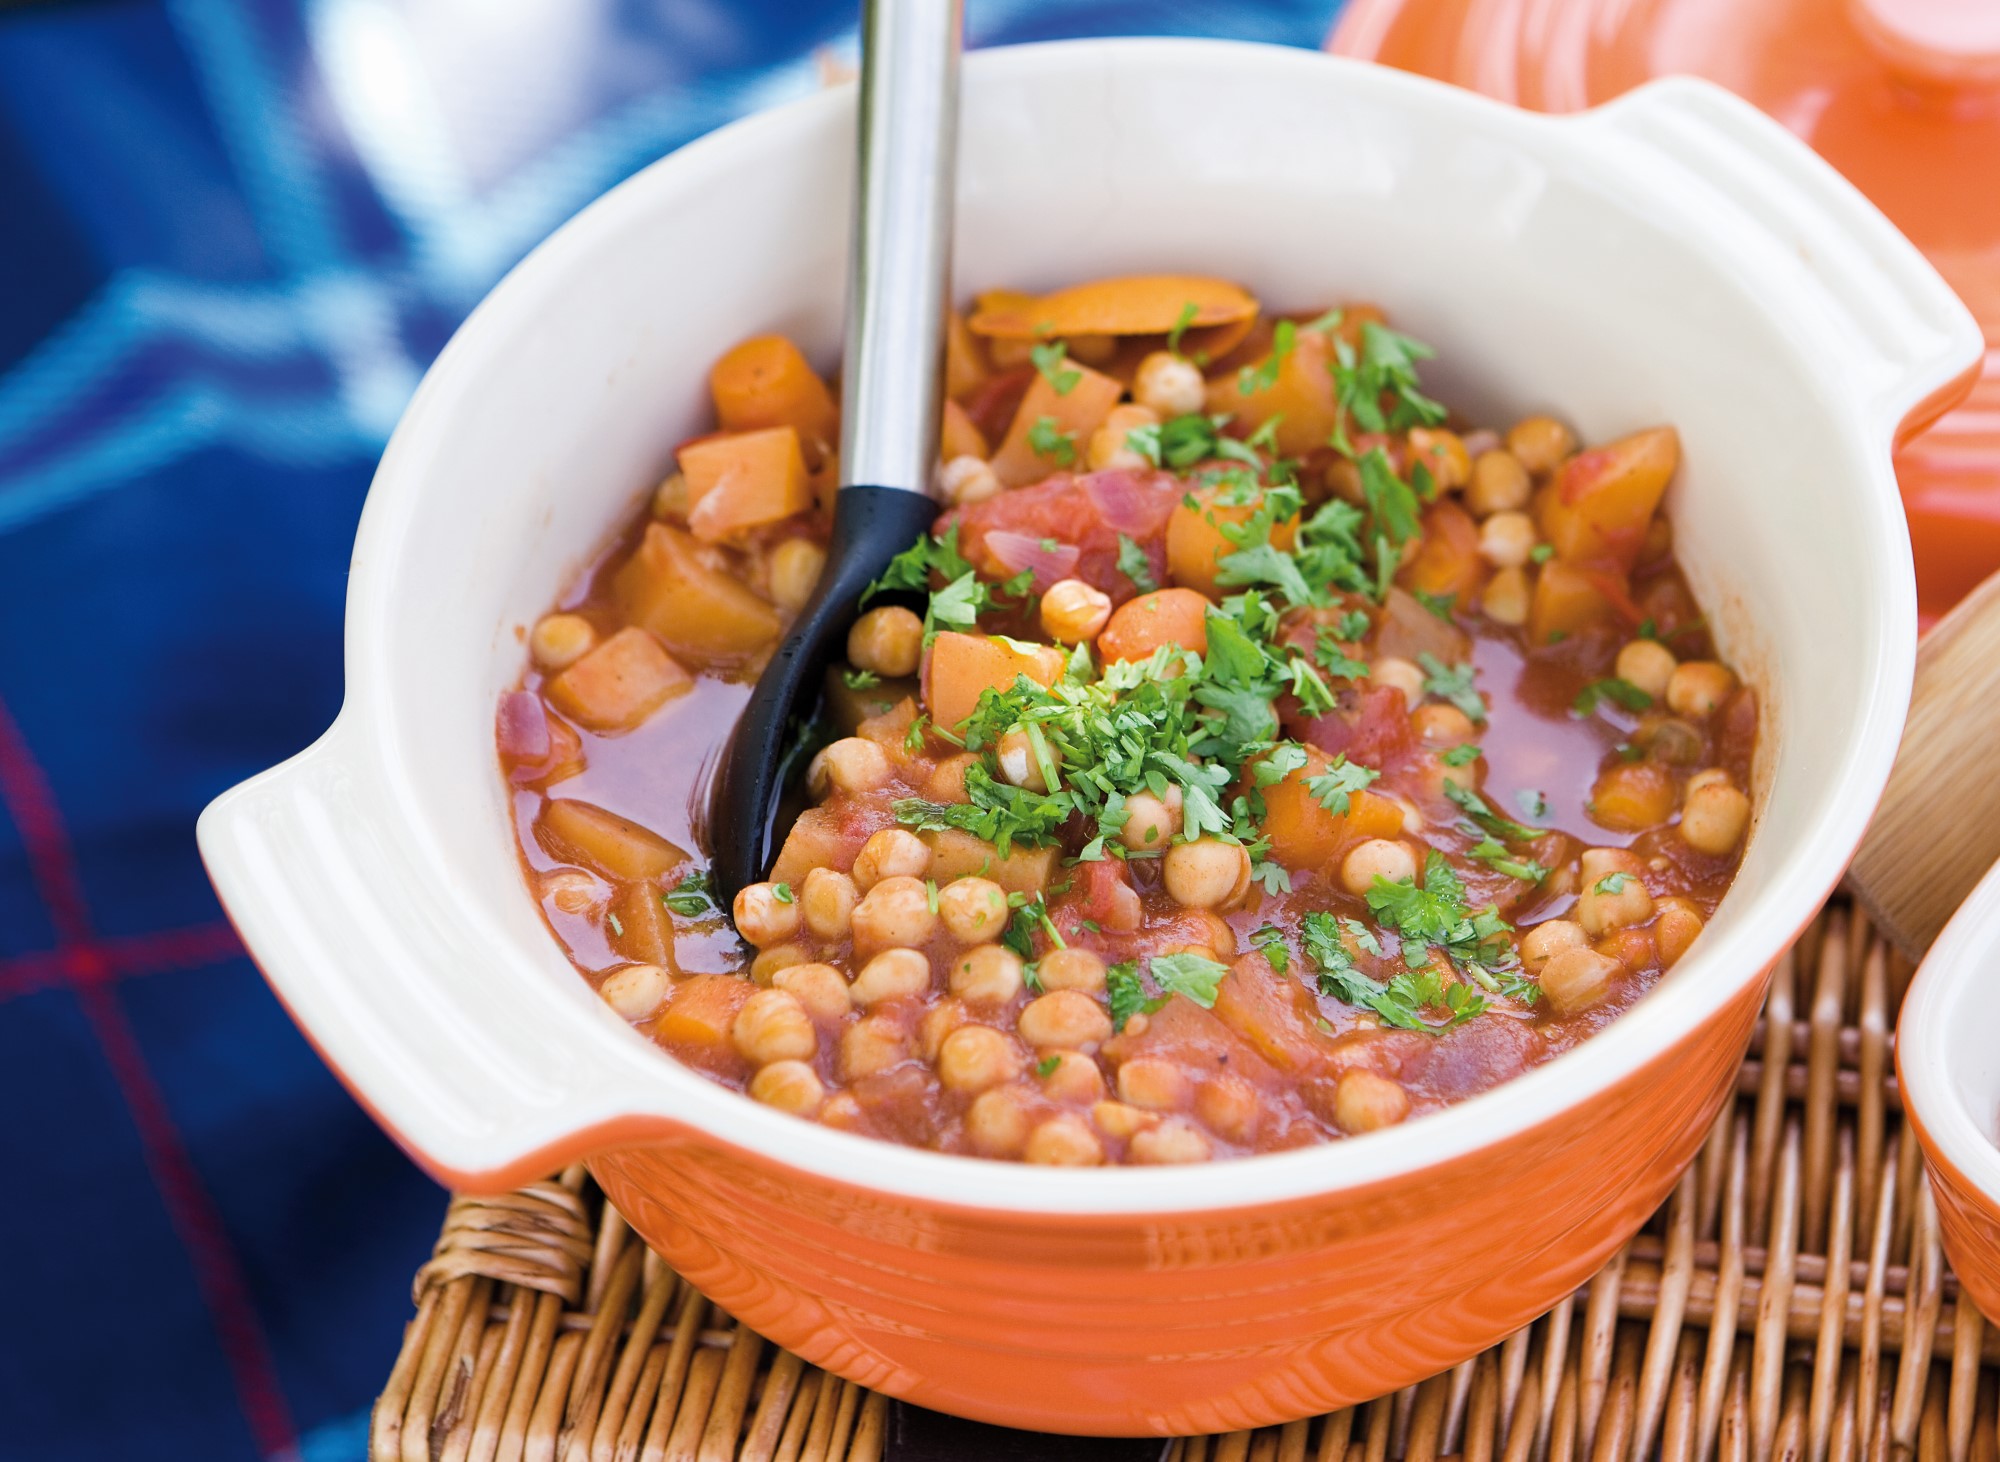 Chickpea and Root Vegetable Stew in an orange casserole dish. The chickpeas and chunks of swede and carrot are topped with chopped parsley